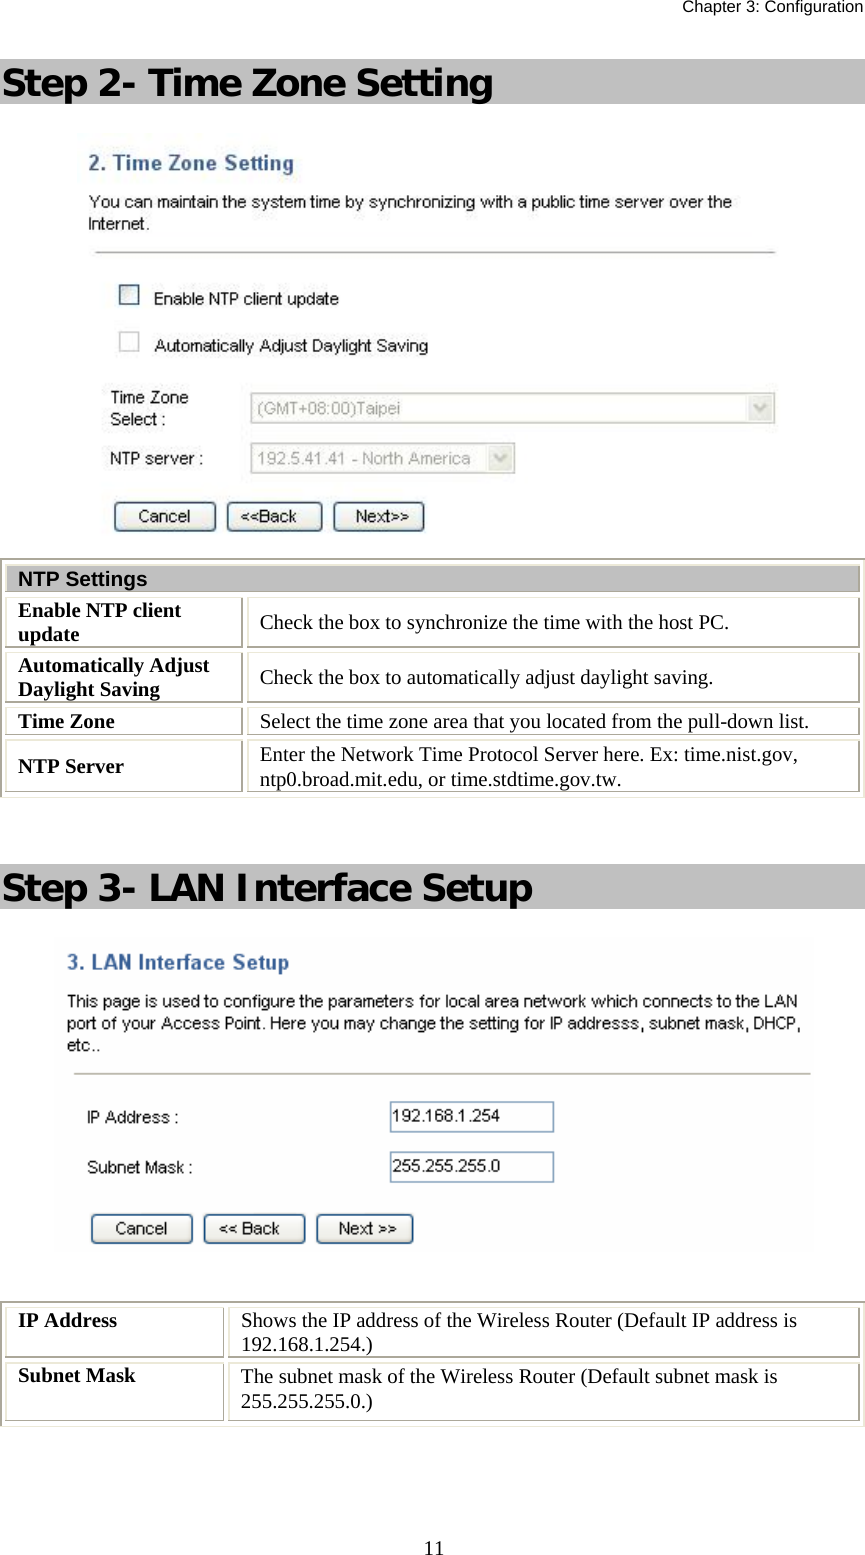   Chapter 3: Configuration  11Step 2- Time Zone Setting  NTP Settings Enable NTP client update  Check the box to synchronize the time with the host PC. Automatically Adjust Daylight Saving  Check the box to automatically adjust daylight saving. Time Zone  Select the time zone area that you located from the pull-down list. NTP Server  Enter the Network Time Protocol Server here. Ex: time.nist.gov, ntp0.broad.mit.edu, or time.stdtime.gov.tw.  Step 3- LAN Interface Setup   IP Address  Shows the IP address of the Wireless Router (Default IP address is 192.168.1.254.) Subnet Mask  The subnet mask of the Wireless Router (Default subnet mask is 255.255.255.0.)   